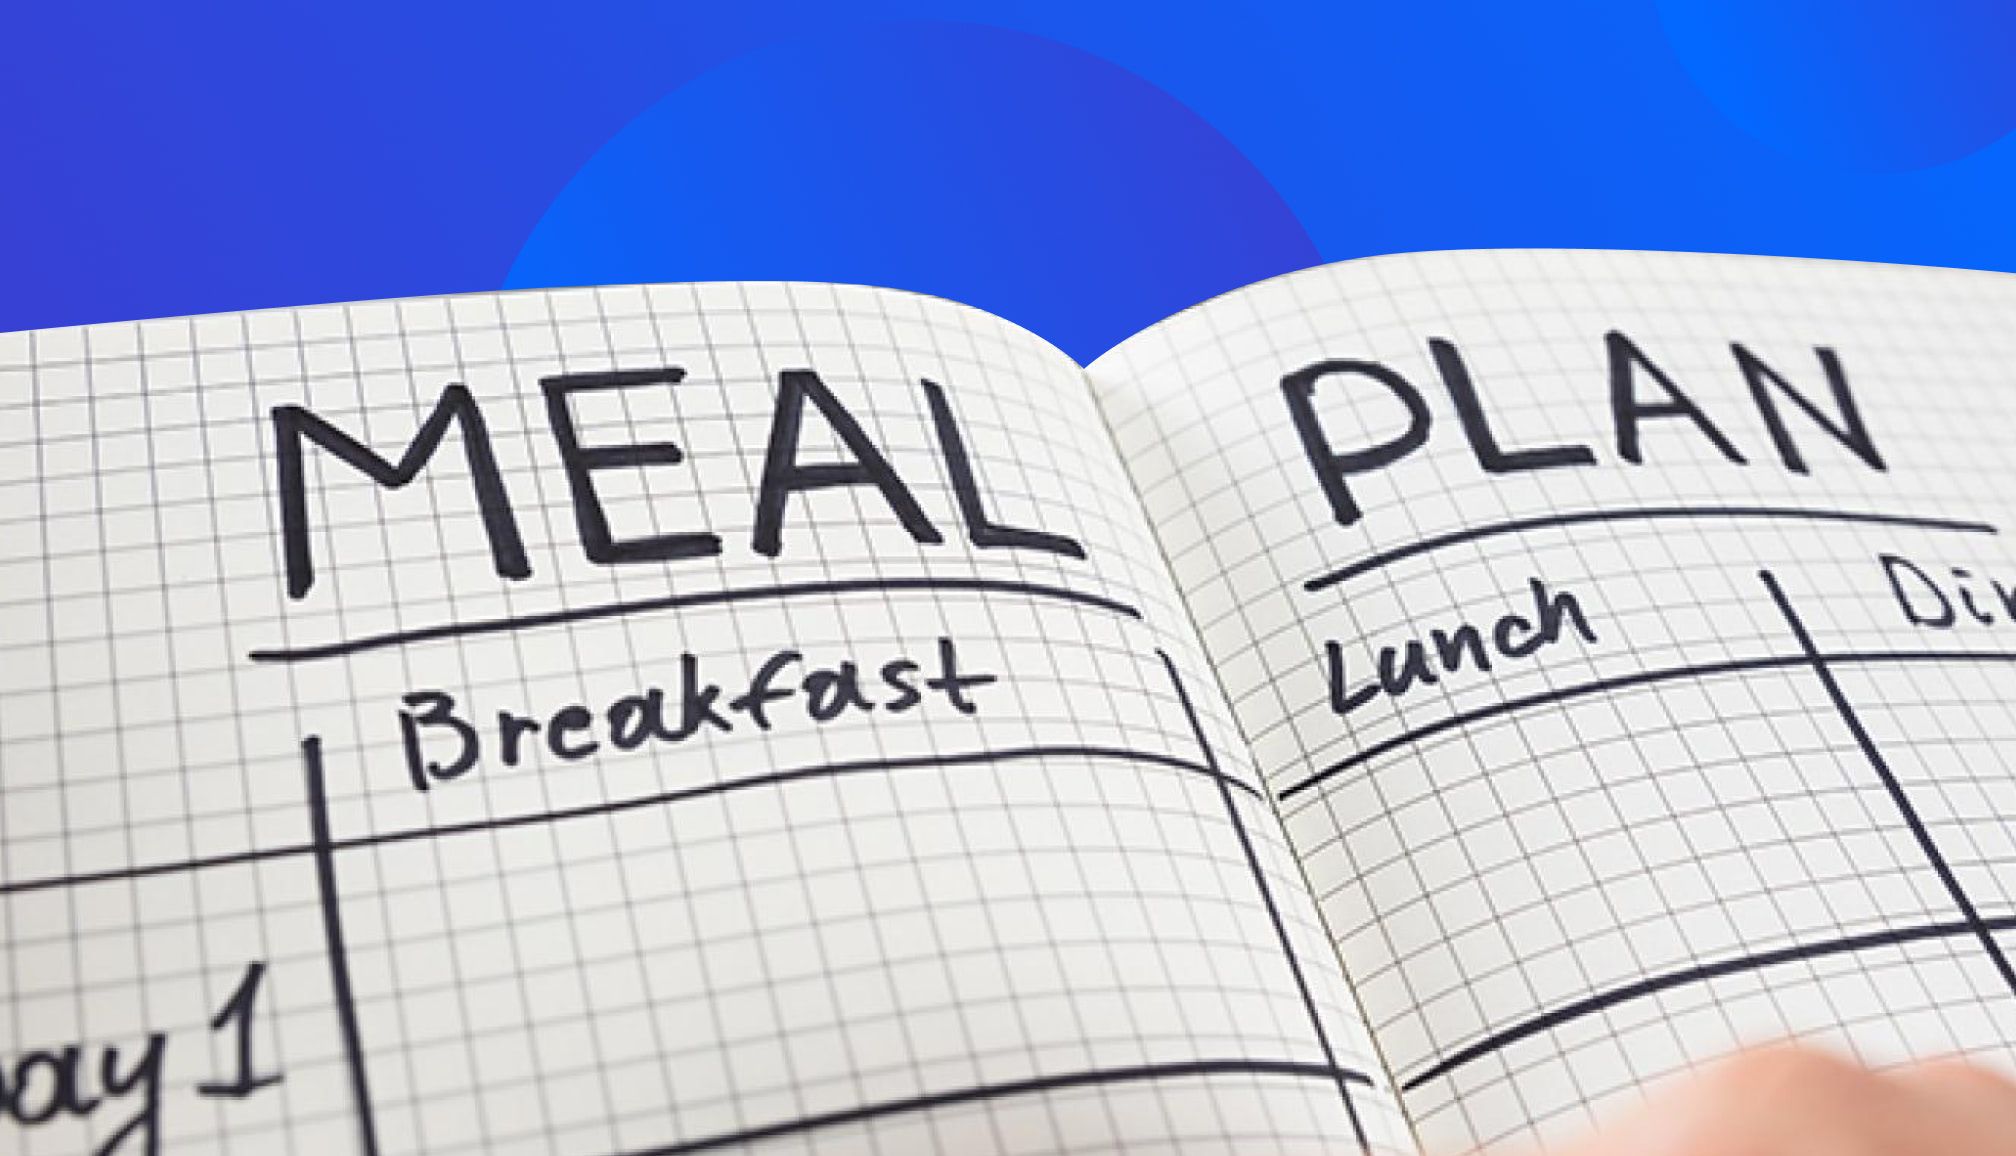 Notebook with meal plan for breakfast, lunch and dinner